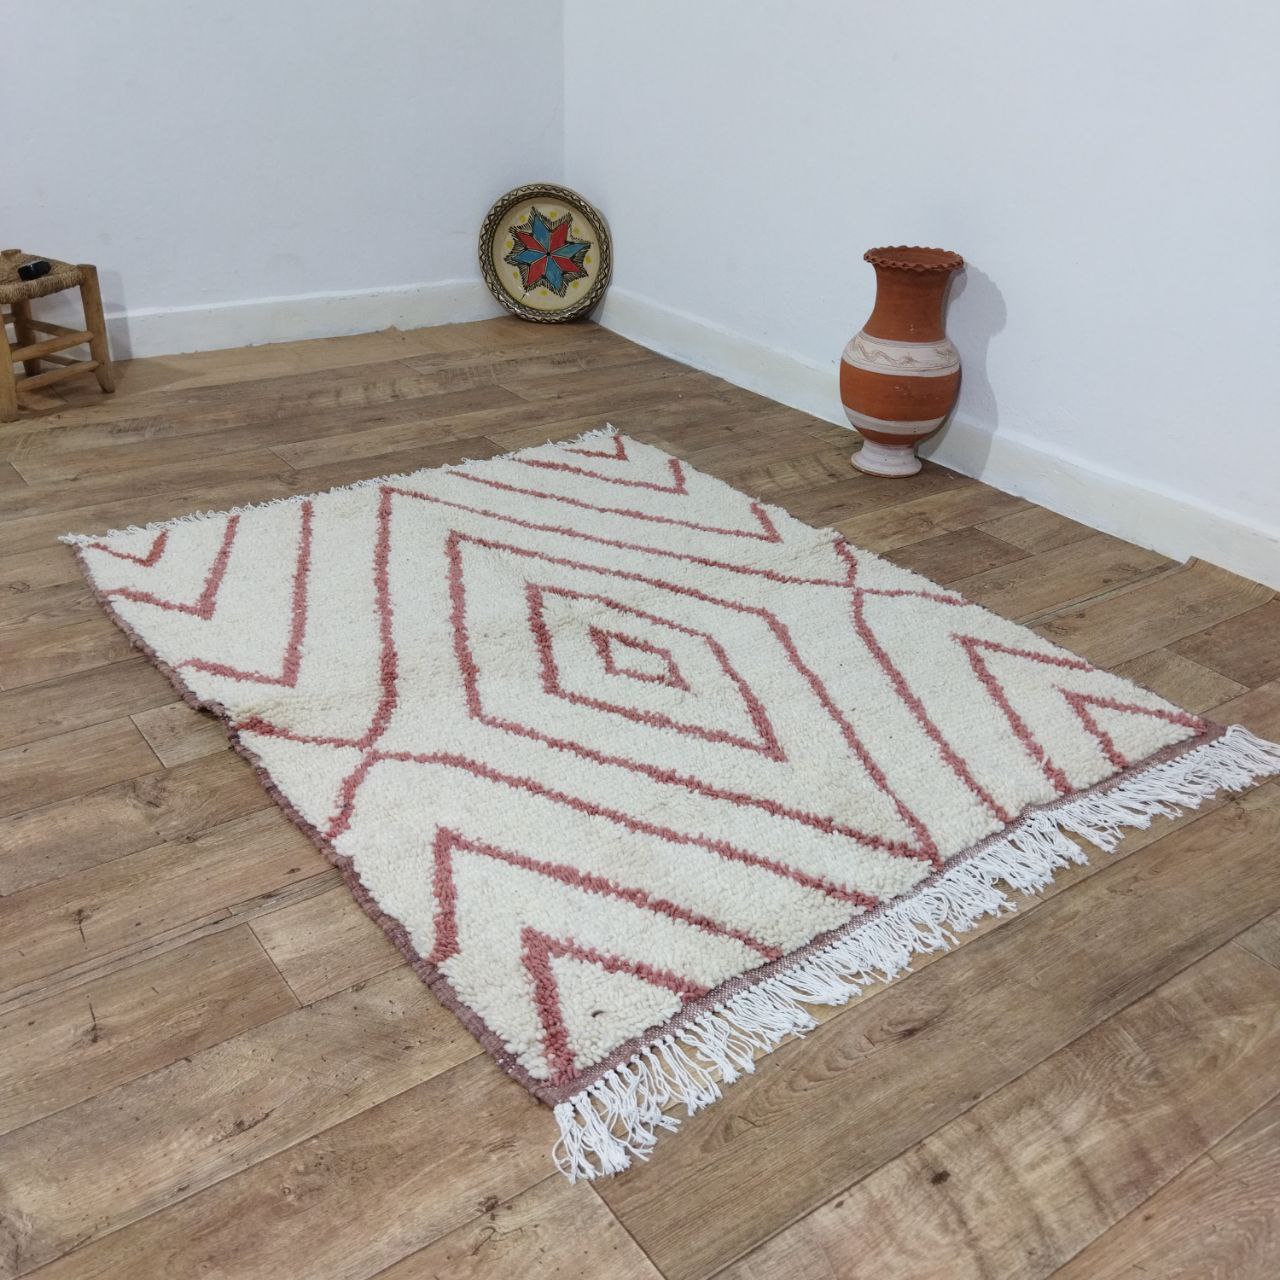 Authentic White And Red Moroccan Small Rug - 4x5 Ft Wool Berber Carpet